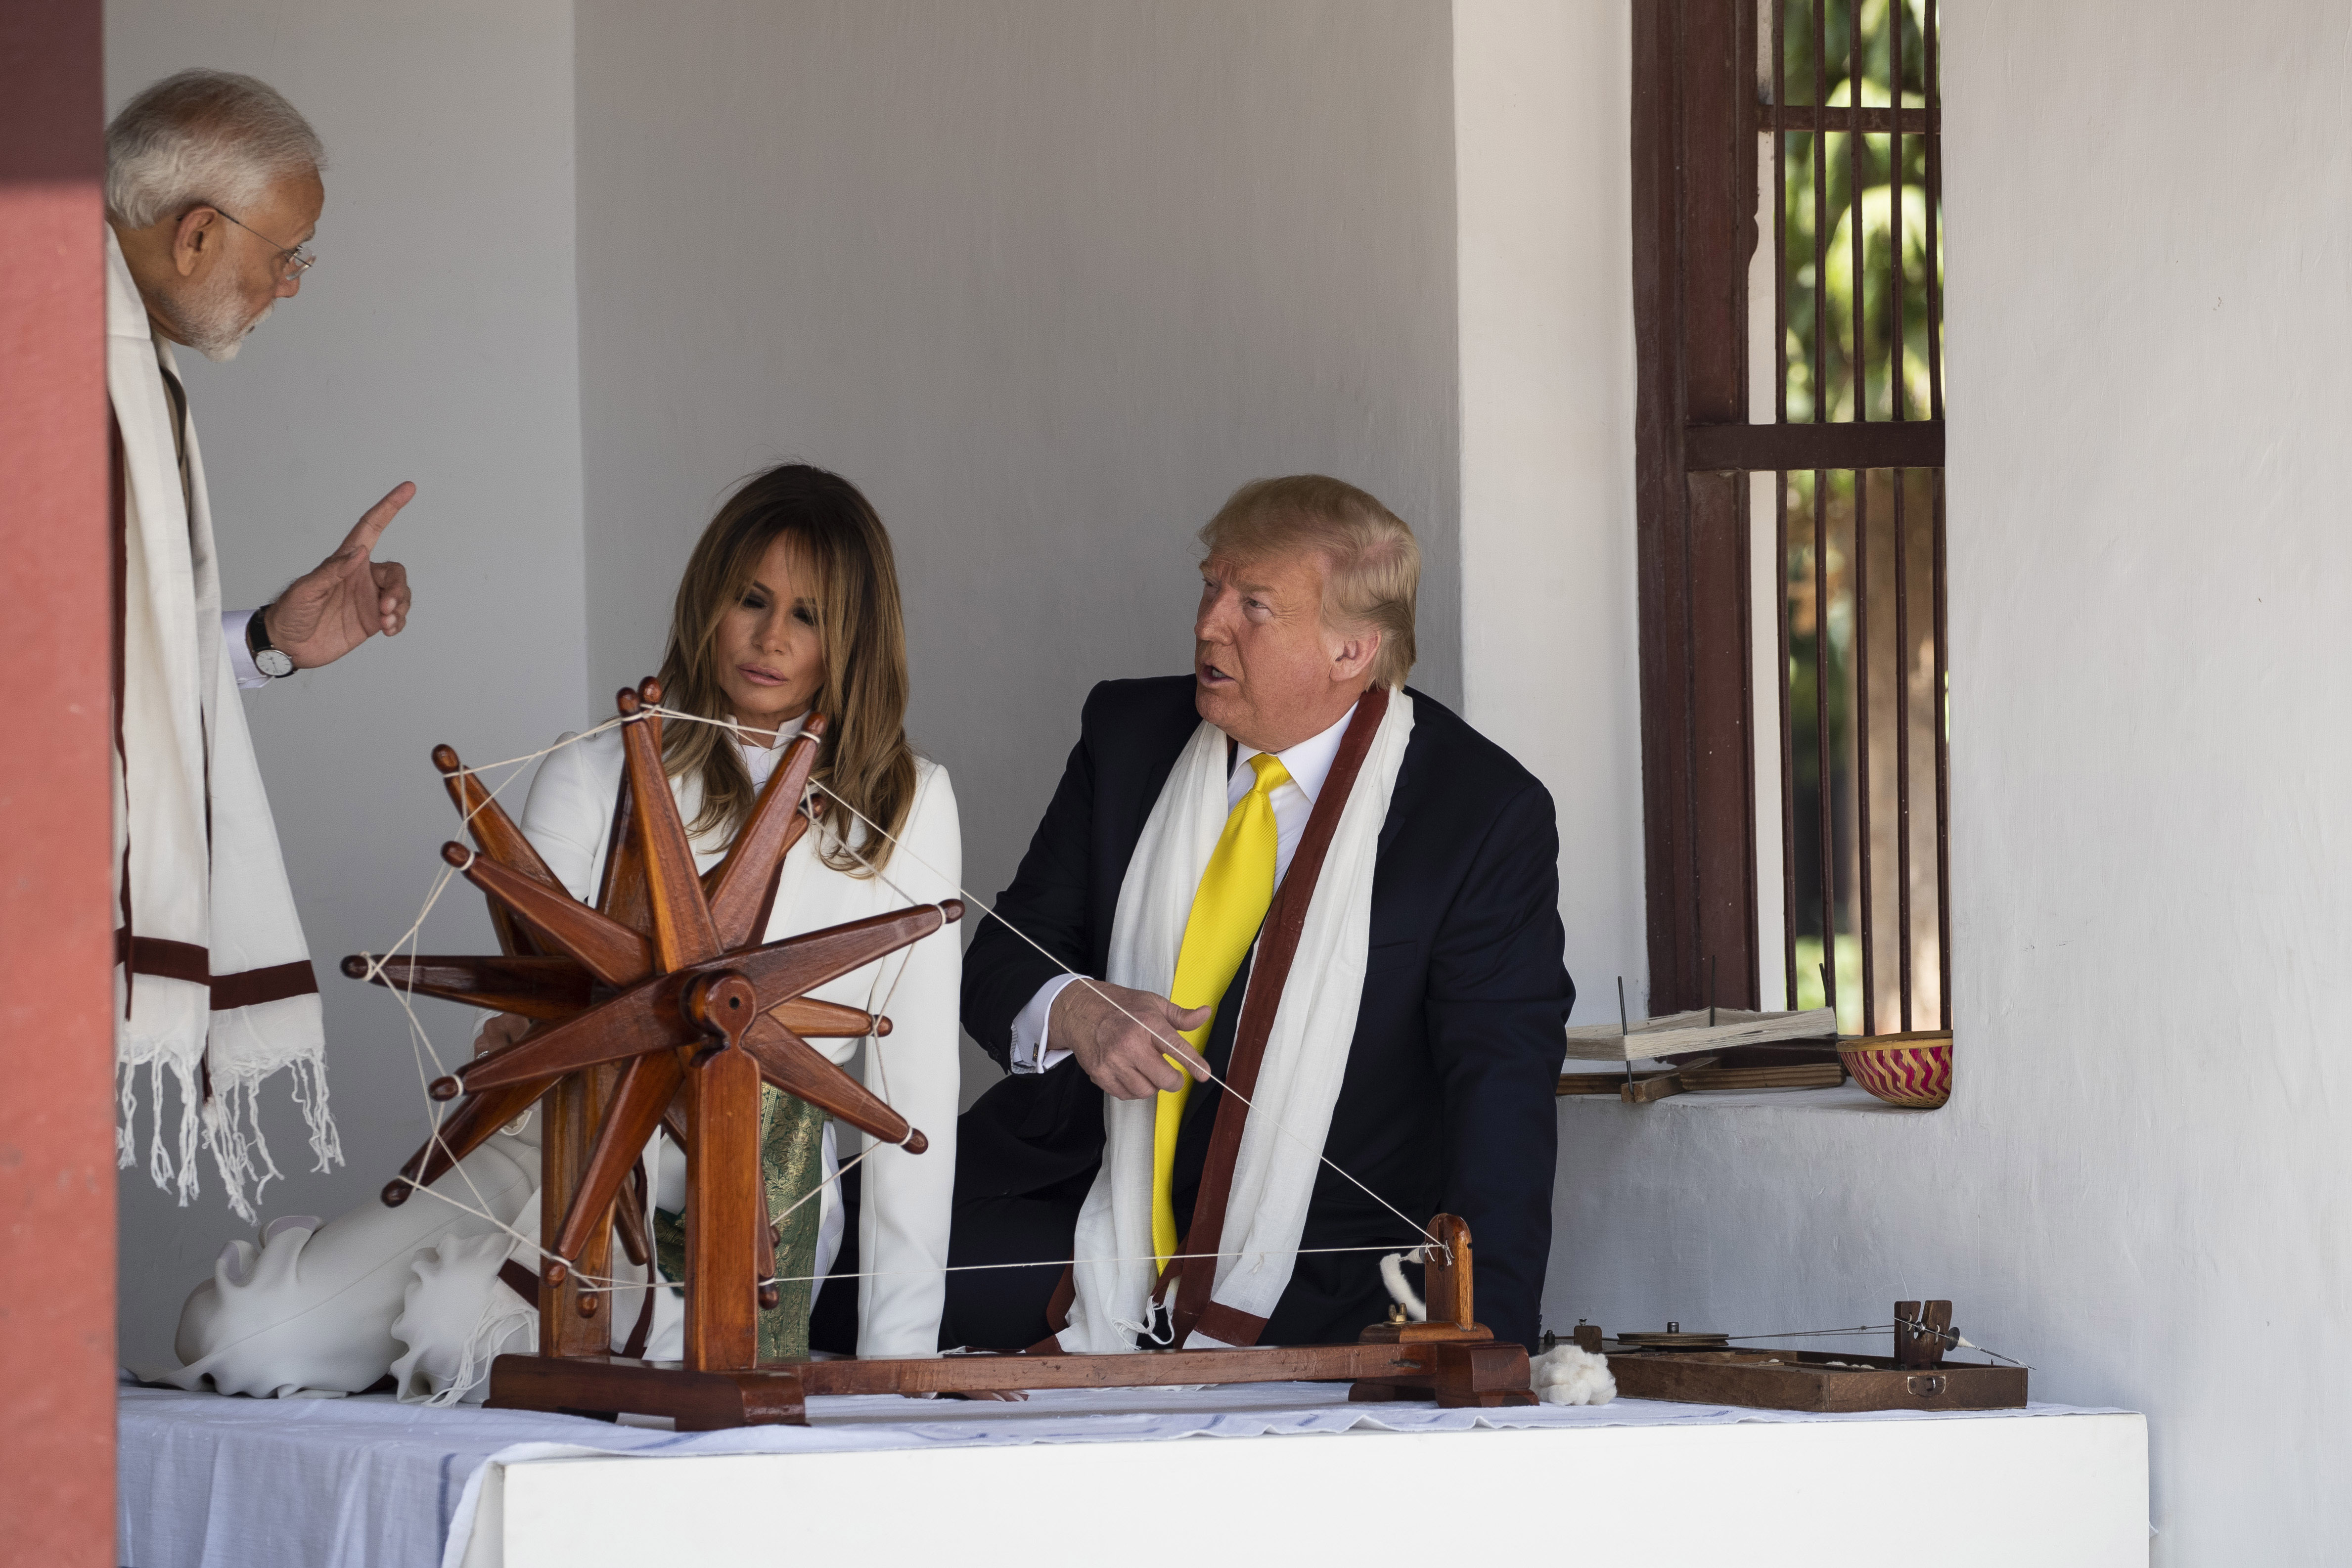 US President Donald Trump with First Lady Melania Trump and Prime Minister Narendra Modi, look at a Charkha or a spinning wheel, during a tour of Gandhi Ashram in Ahmedabad on Monday.